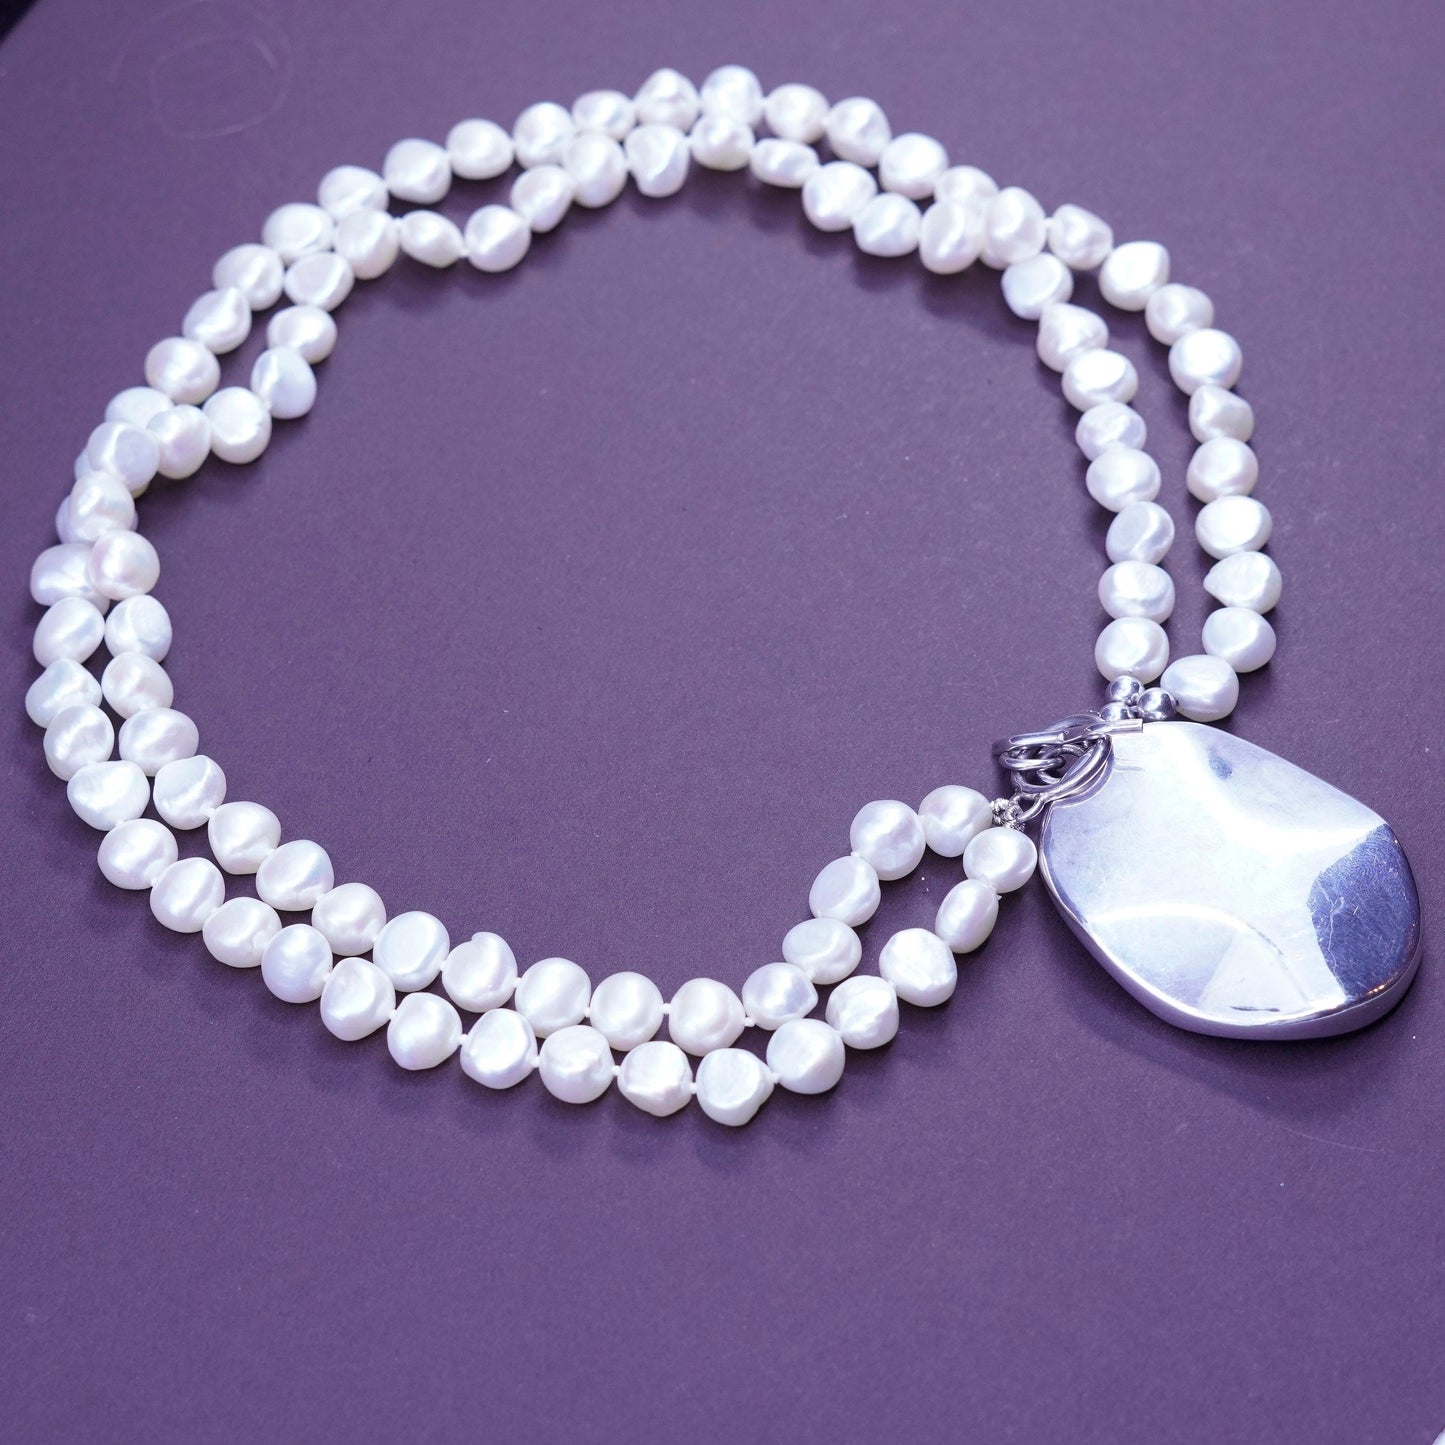 18”, vintage double strand glass pearl beads necklace, 925 silver oval pendant